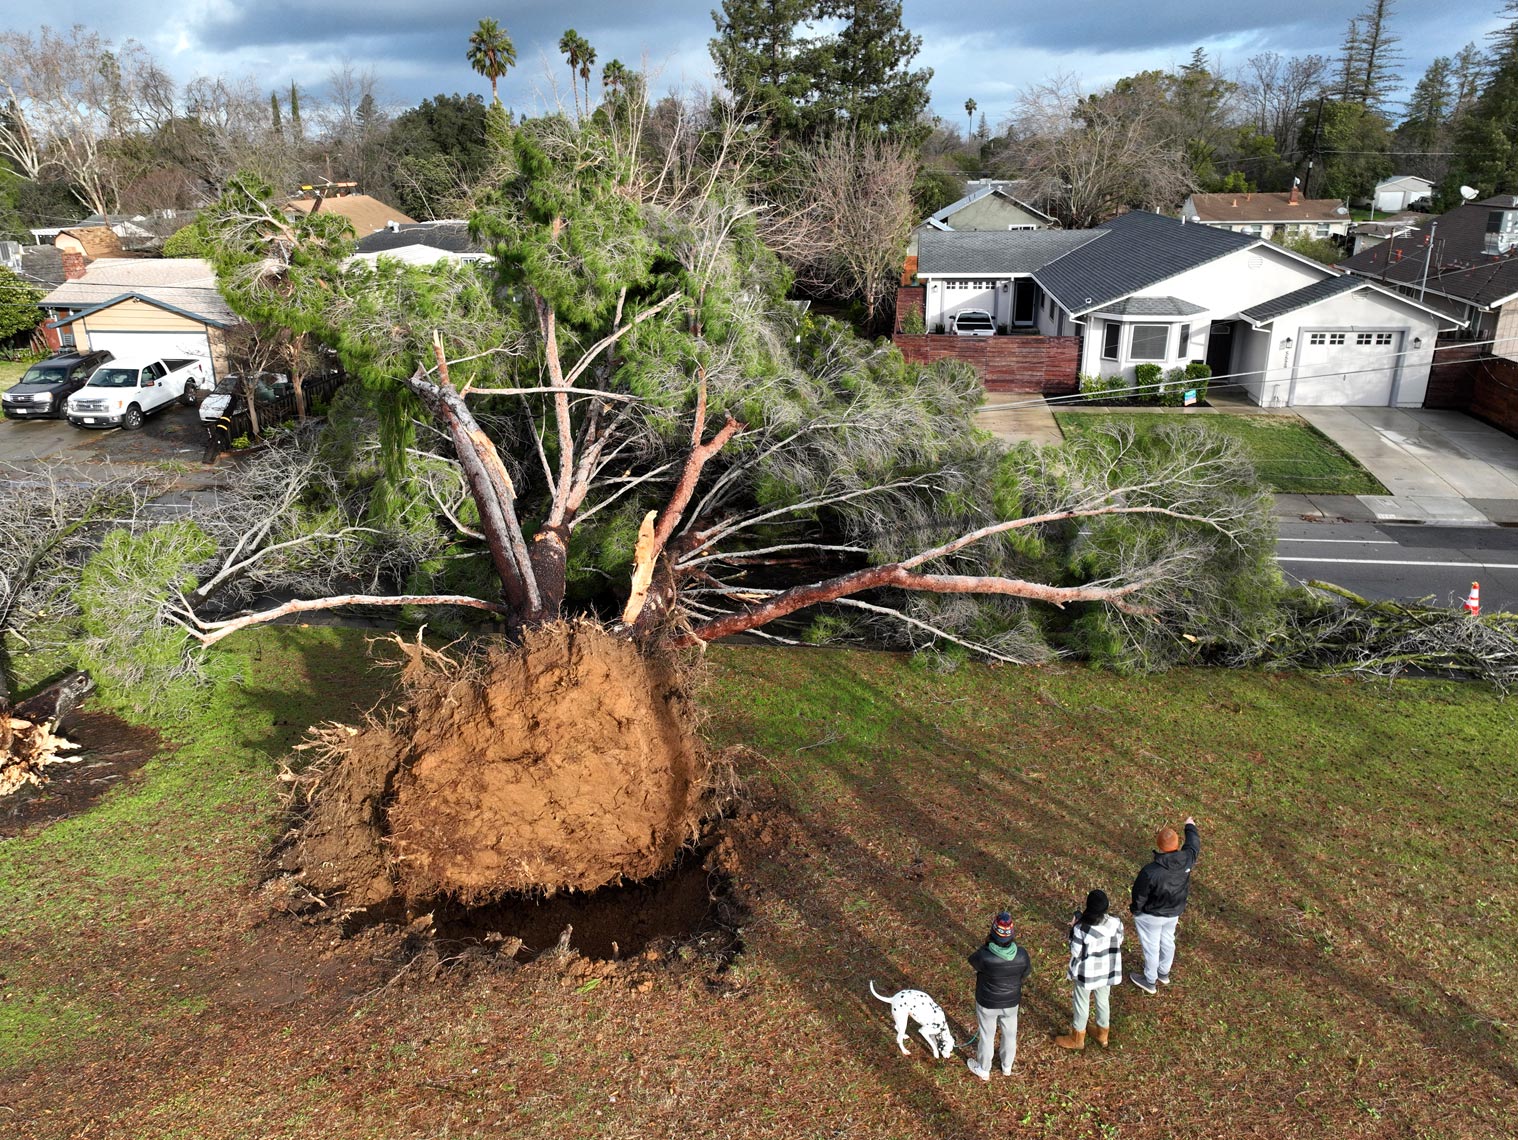 Residents Look at Giant Tree Felled by Winter Storm